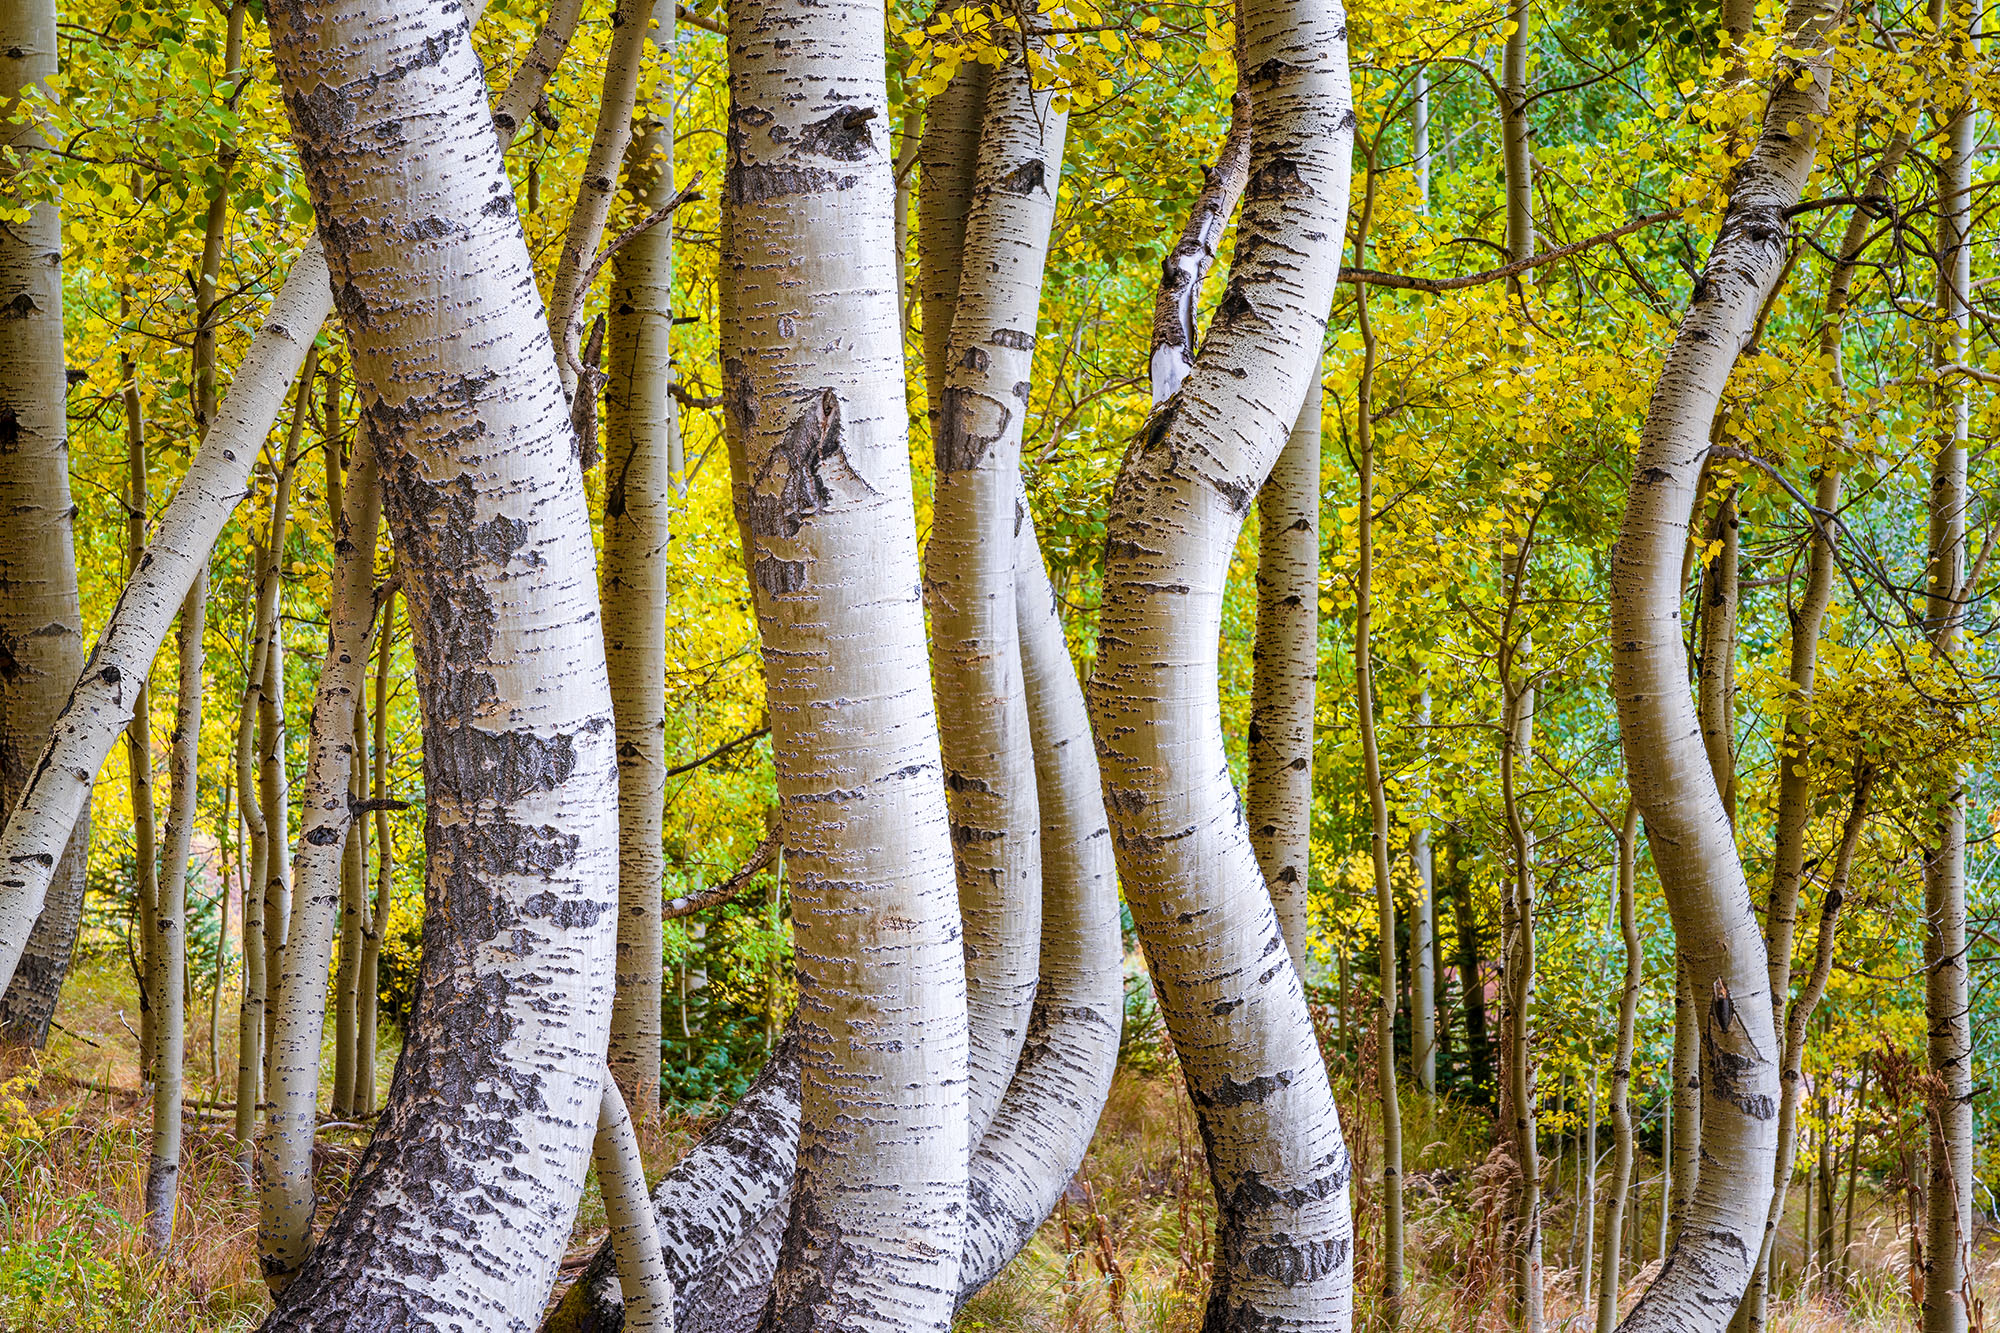 In the heart of fall's embrace, a stand of aspen trees unveils its secret. Their trunks, far from the conventional straightness...